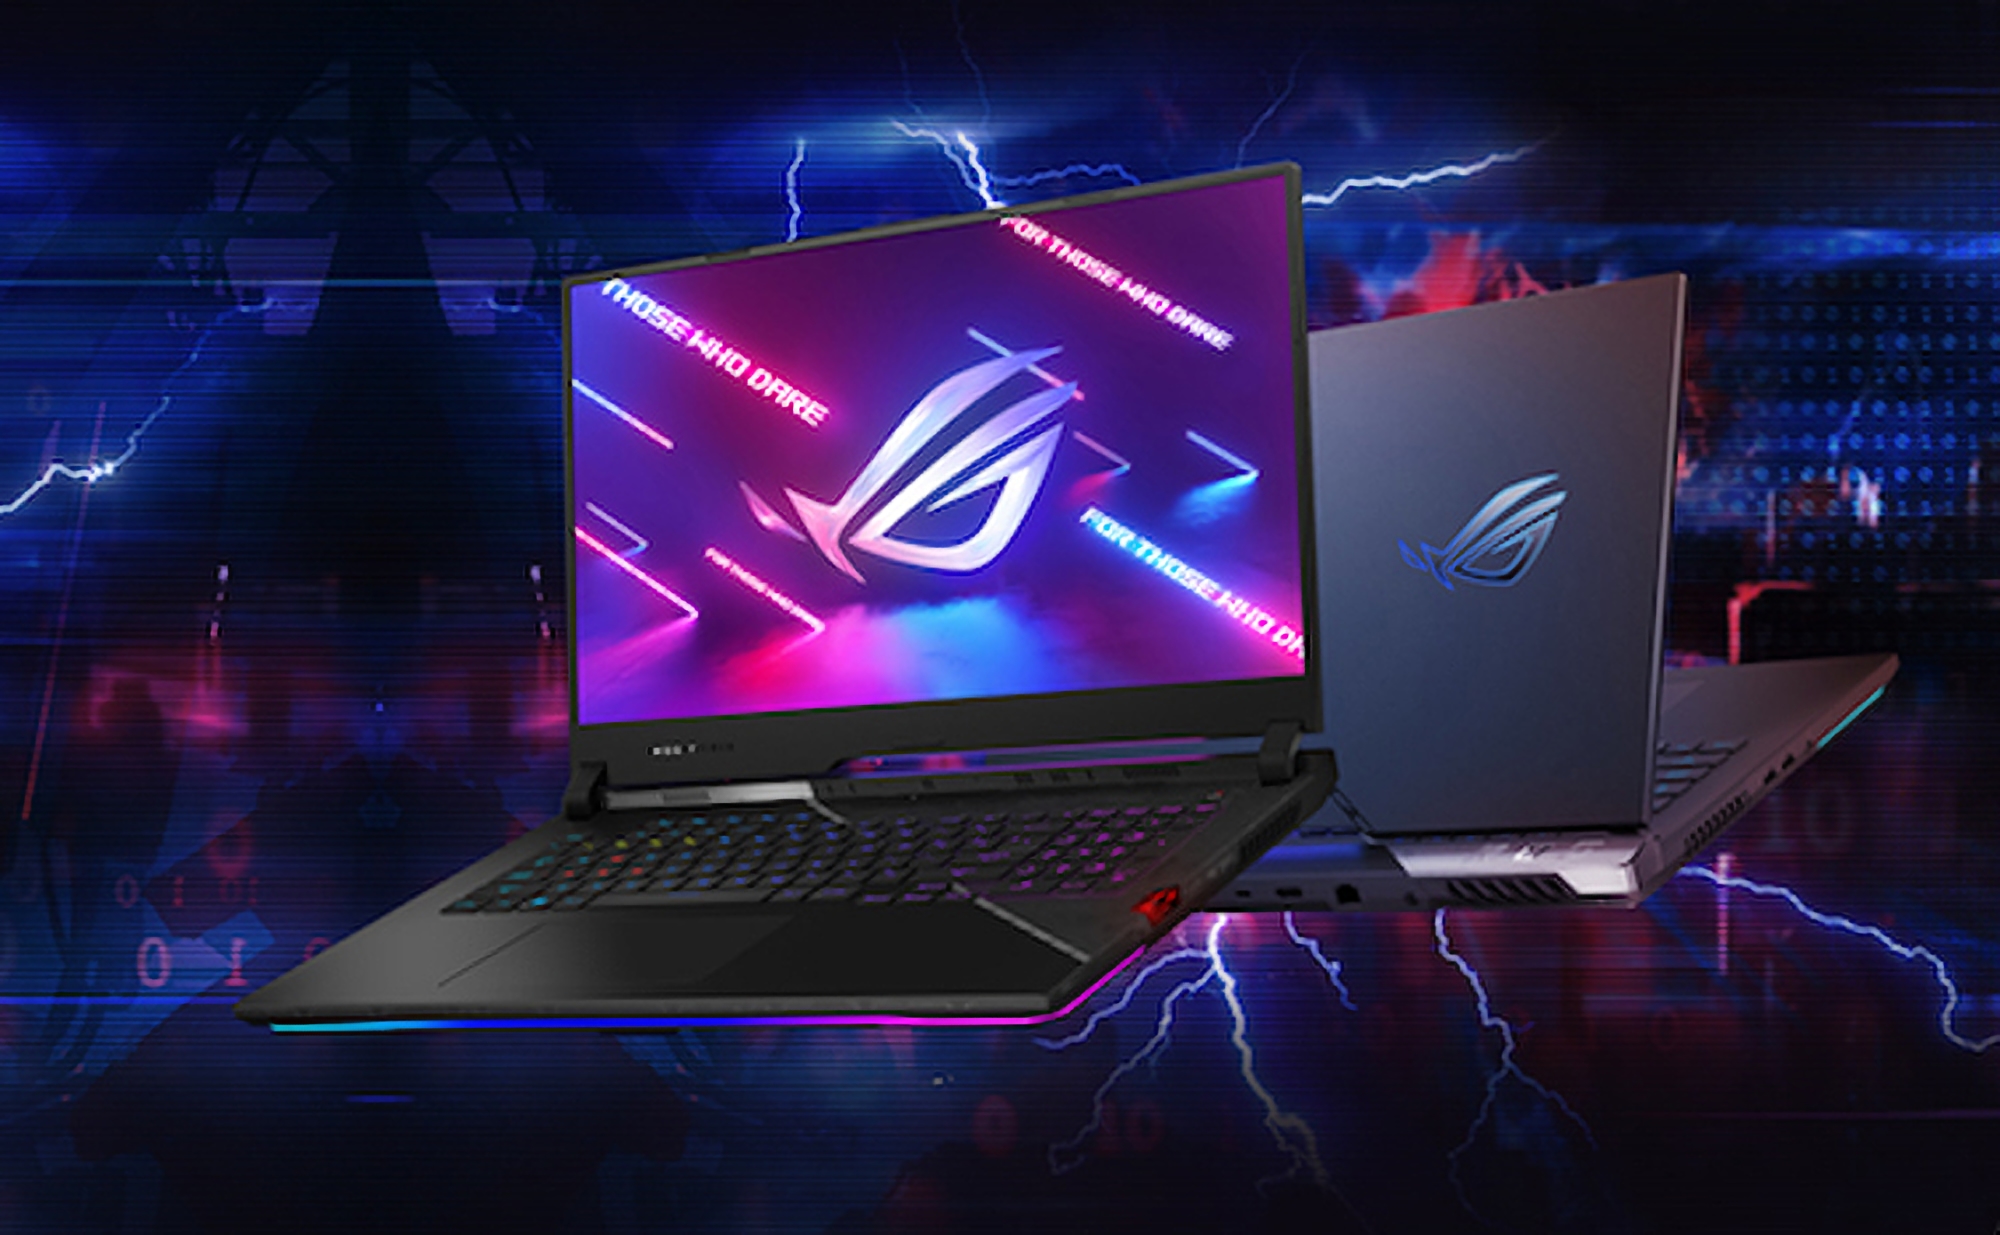 ASUS to Introduce ROG Gunslinger 6 Gaming Laptop Series with Nvidia RTX 3080 Ti Graphics on May 17